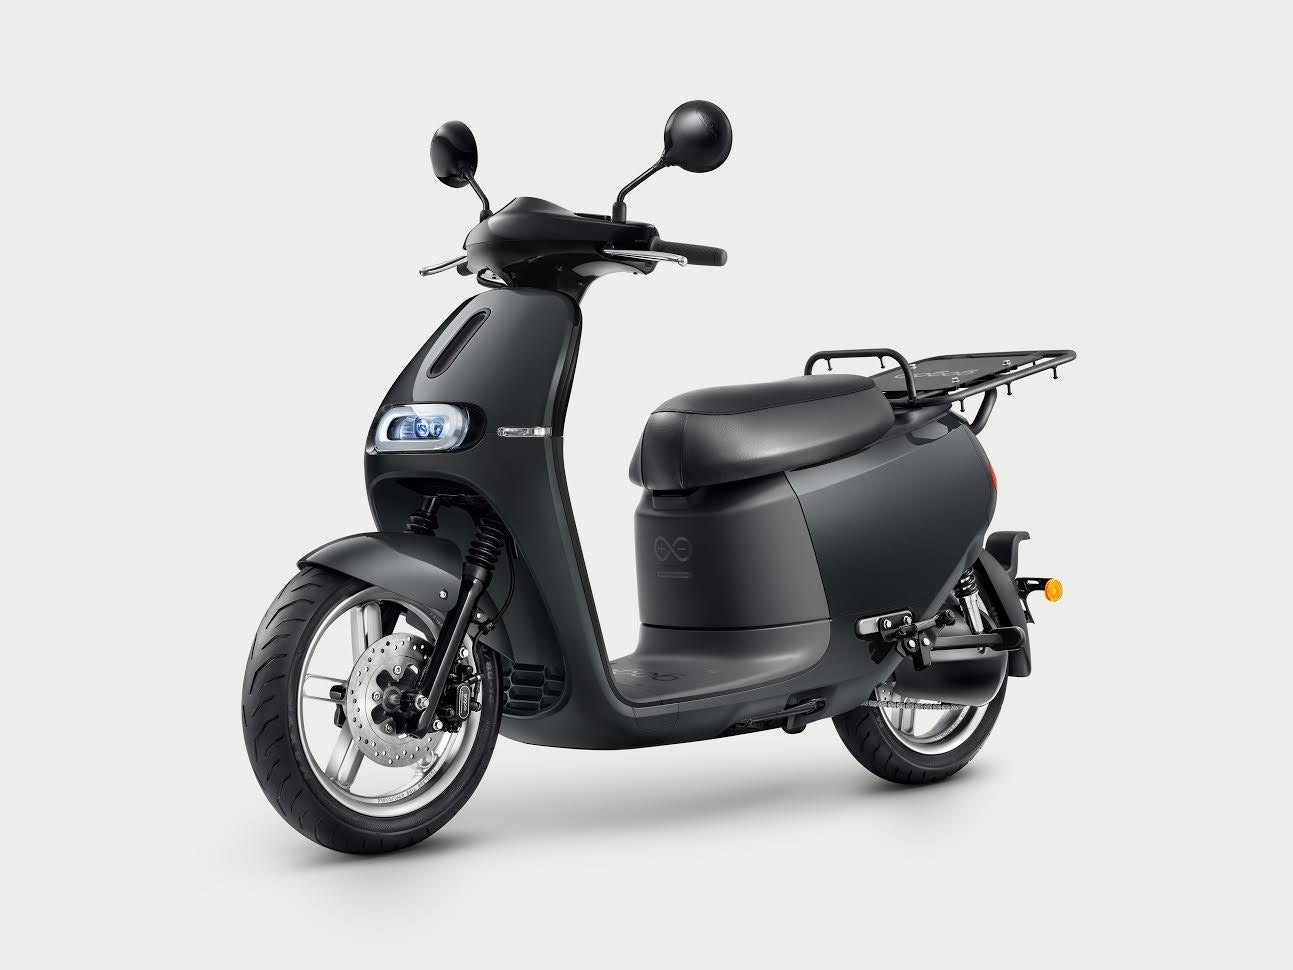 Electric vehicle, Scooter, Gogoro, , Car, Cargo, Electric motorcycles and scooters, Utility, Elektromotorroller, Gogoro Smartscooter, gogoro 2 utility, Land vehicle, Vehicle, Scooter, Motor vehicle, Car, Mode of transport, Automotive design, Motorcycle, Moped, Vespa